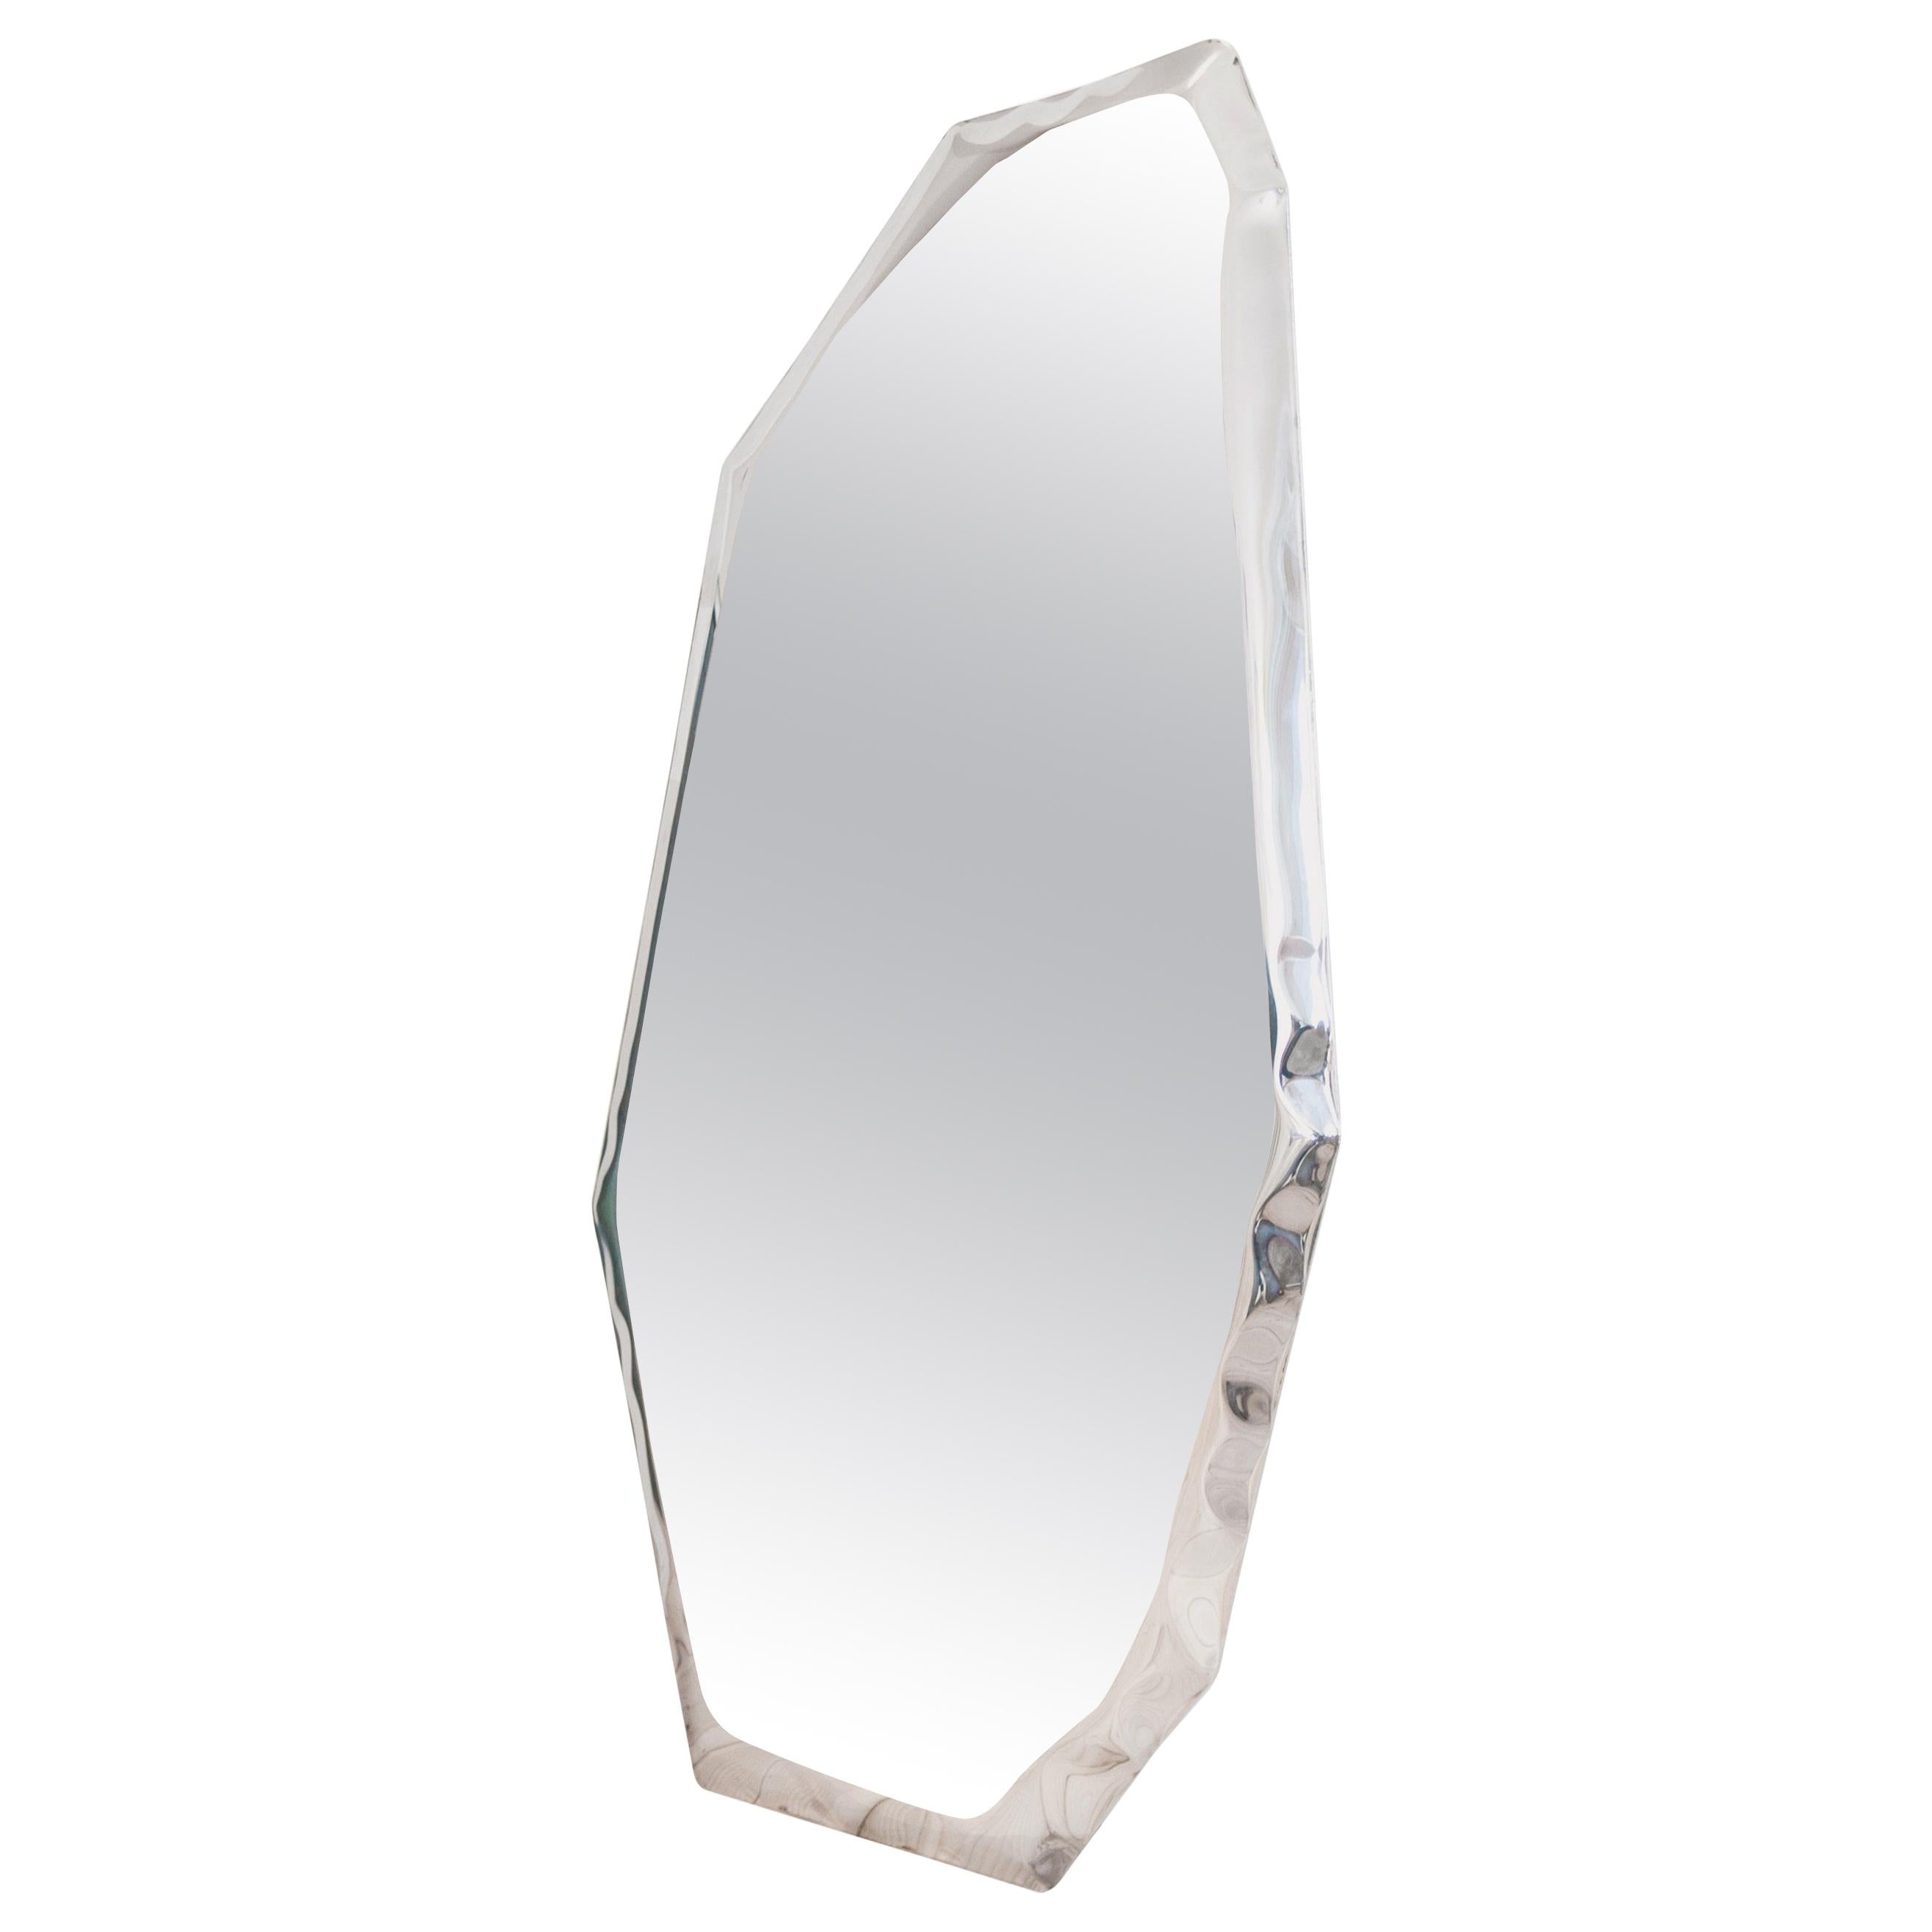 Mirror 'Tafla C4' in Polished Stainless Steel by Zieta, In stock For Sale